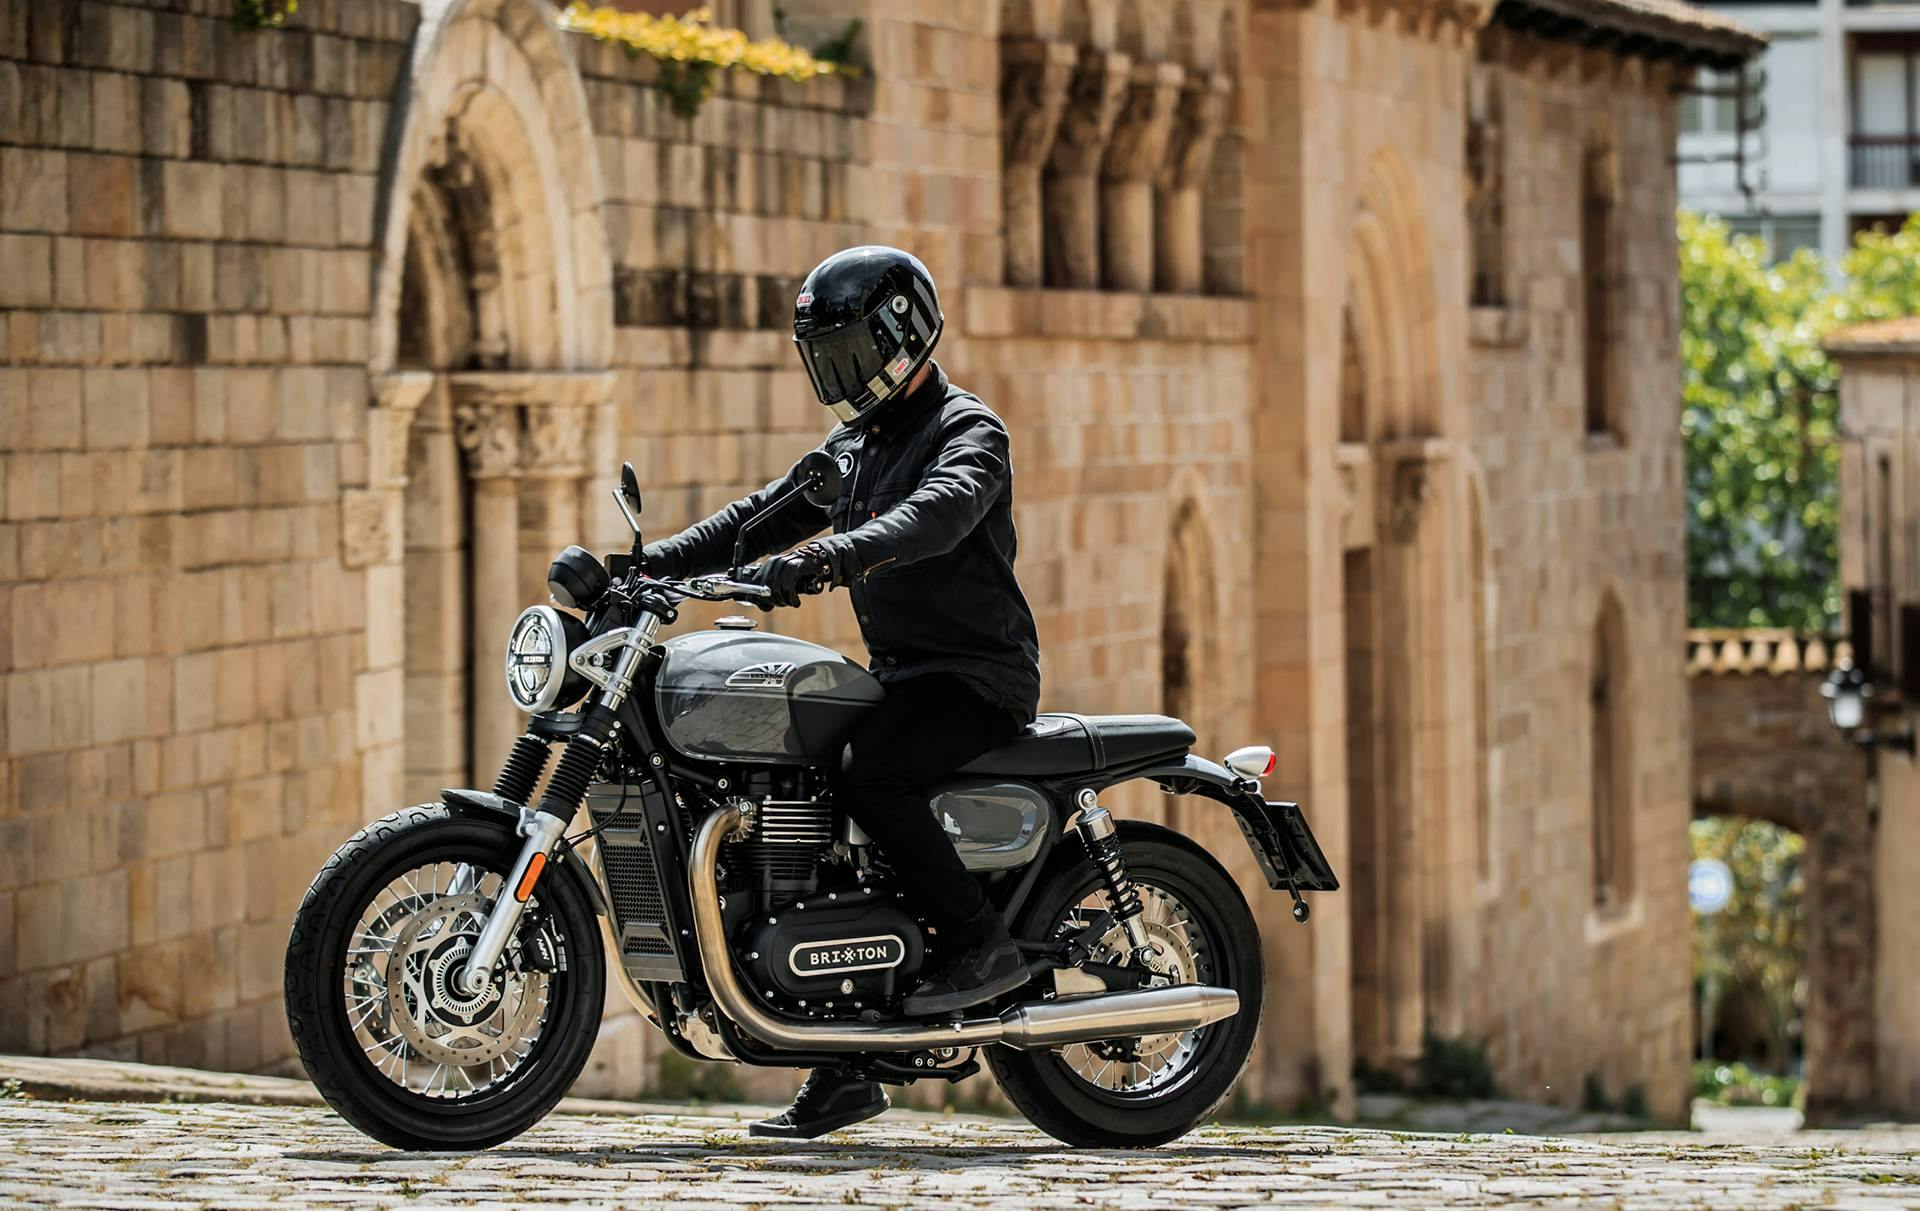 A motorcycle rider dressed in all black sitting on a Brixton Cromwell 1200 in front of an old building in Barcelona, Spain